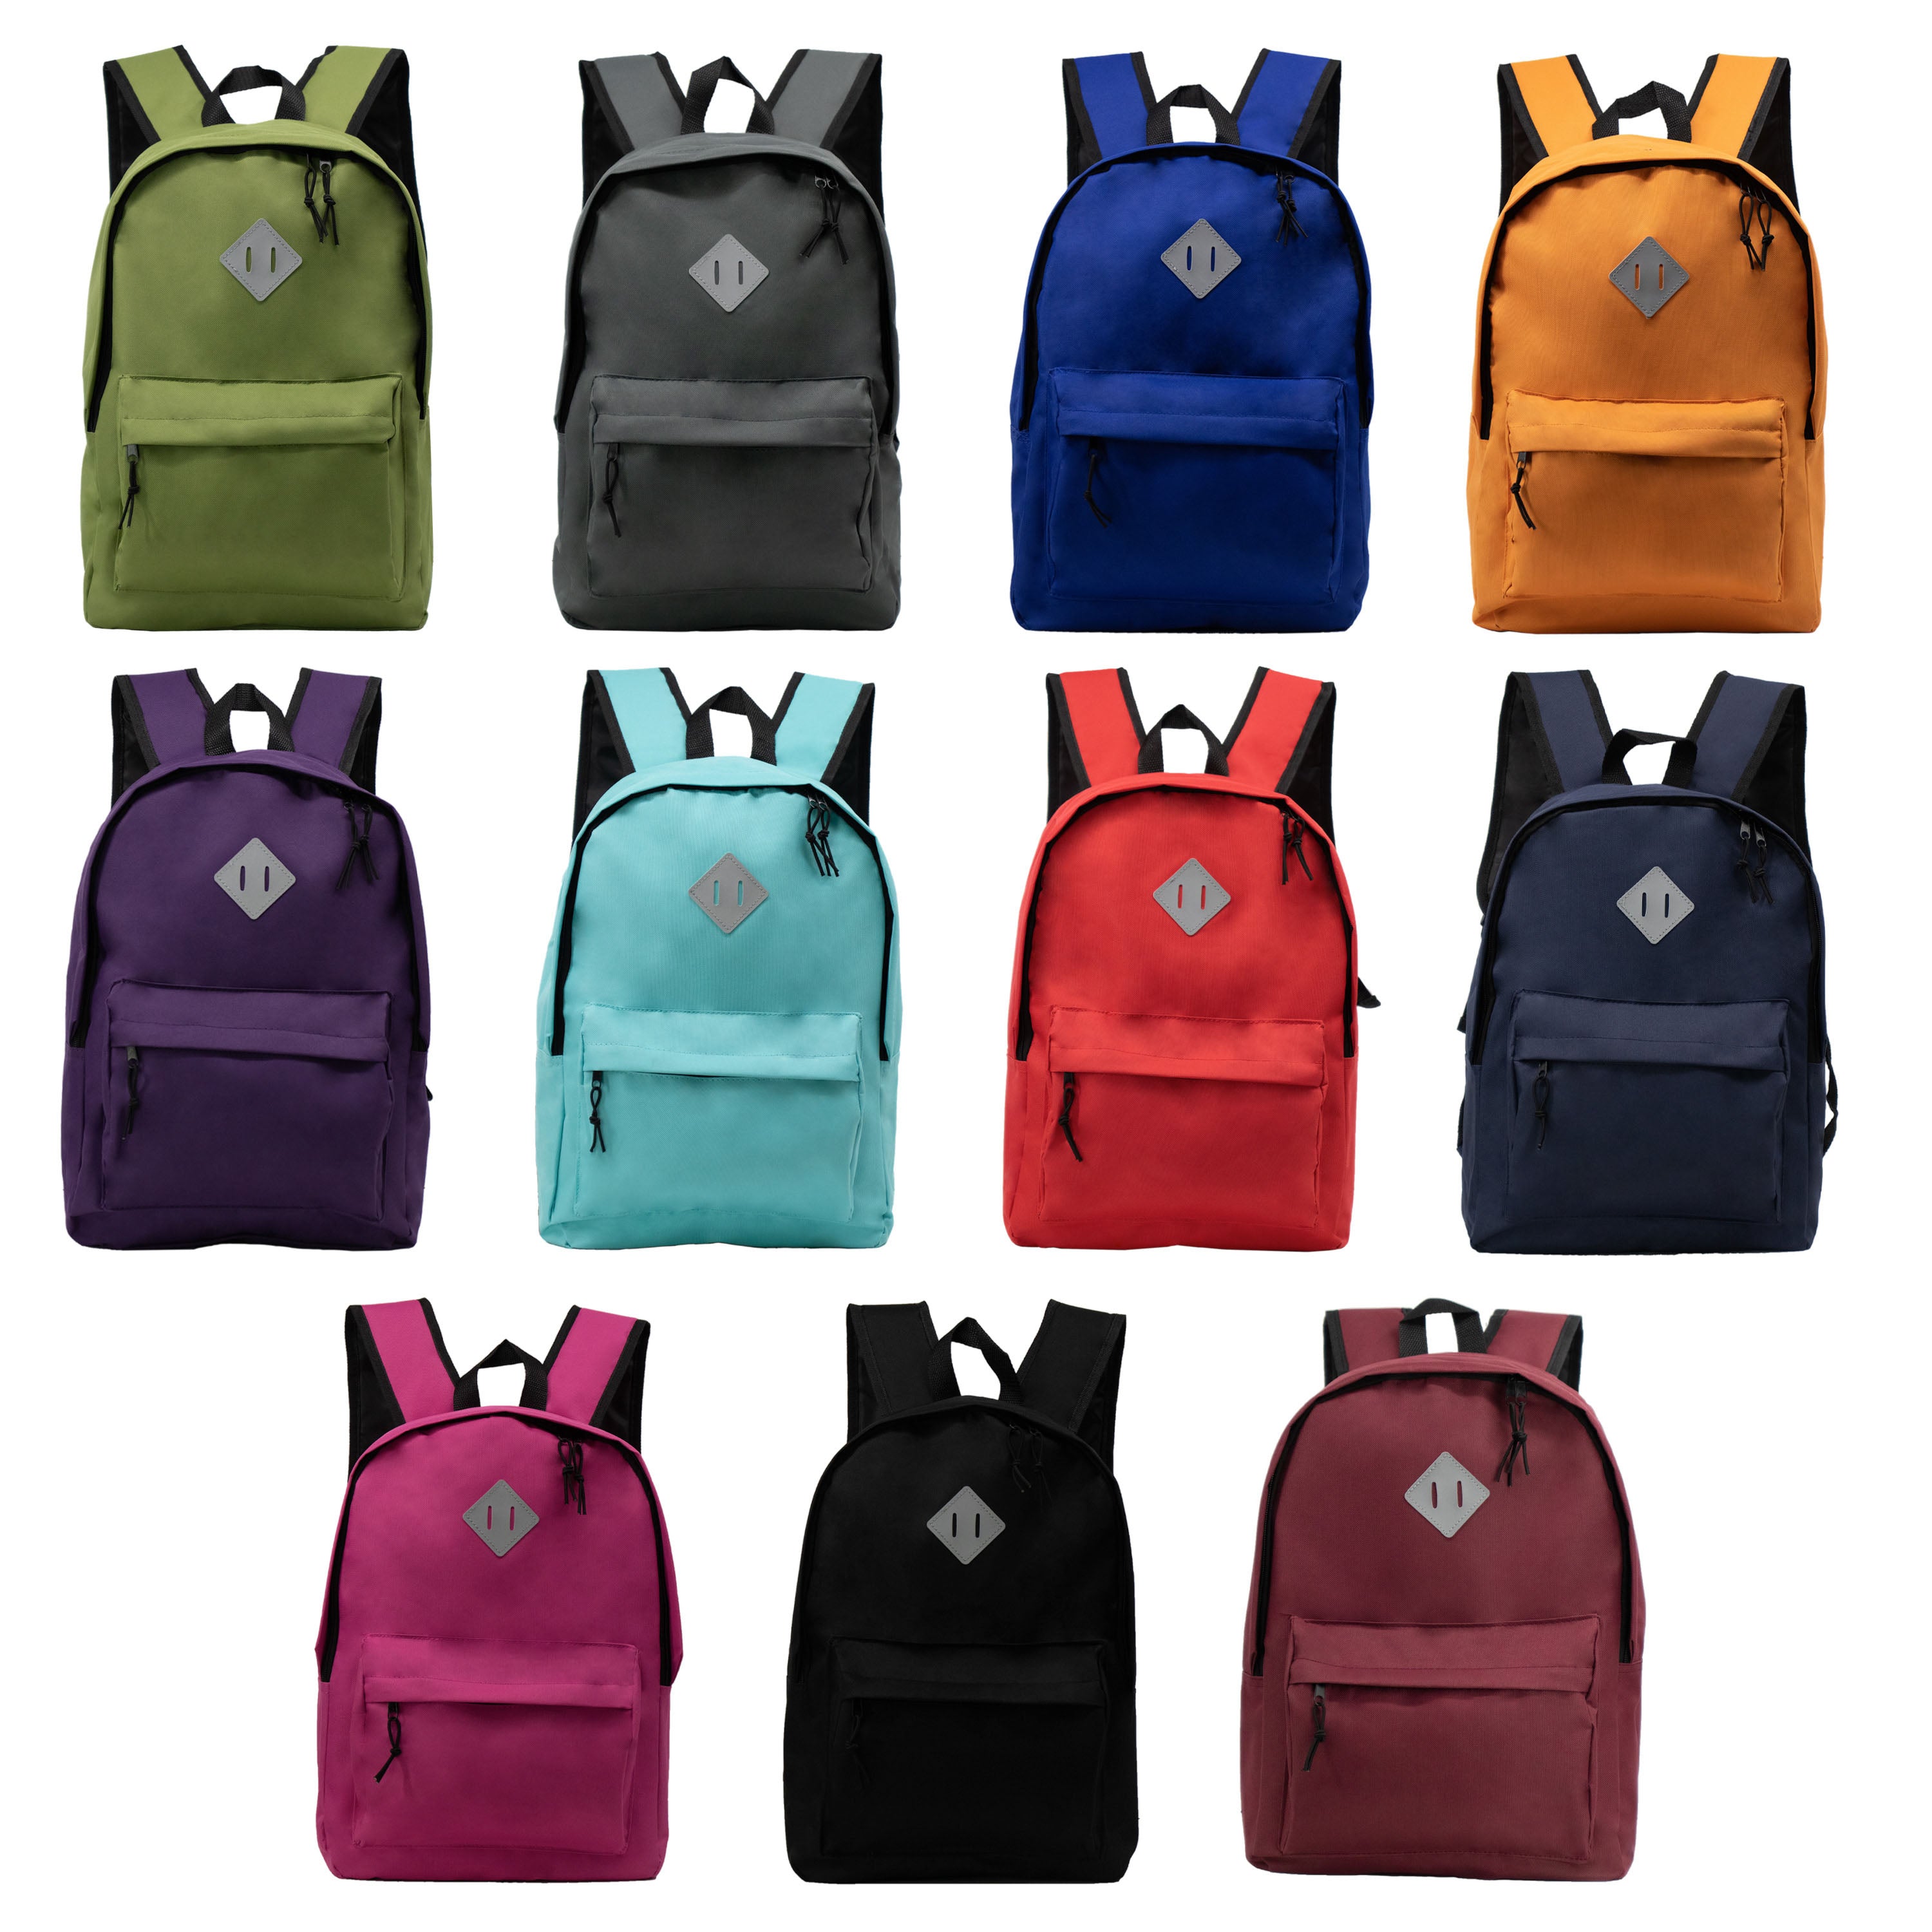 17" Deluxe Wholesale Backpack in Assorted Colors - Bulk Case of 24